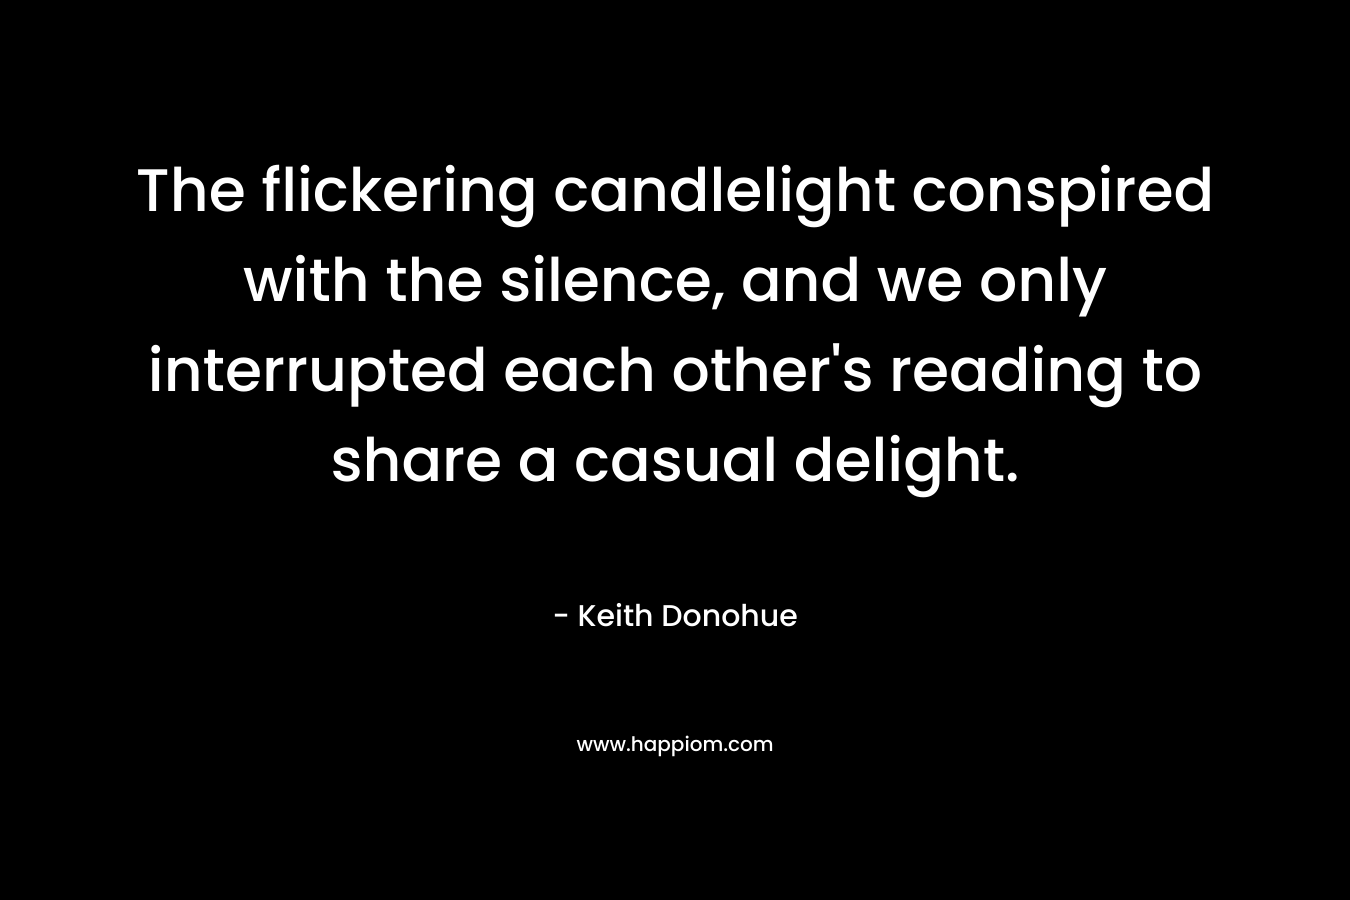 The flickering candlelight conspired with the silence, and we only interrupted each other’s reading to share a casual delight. – Keith Donohue